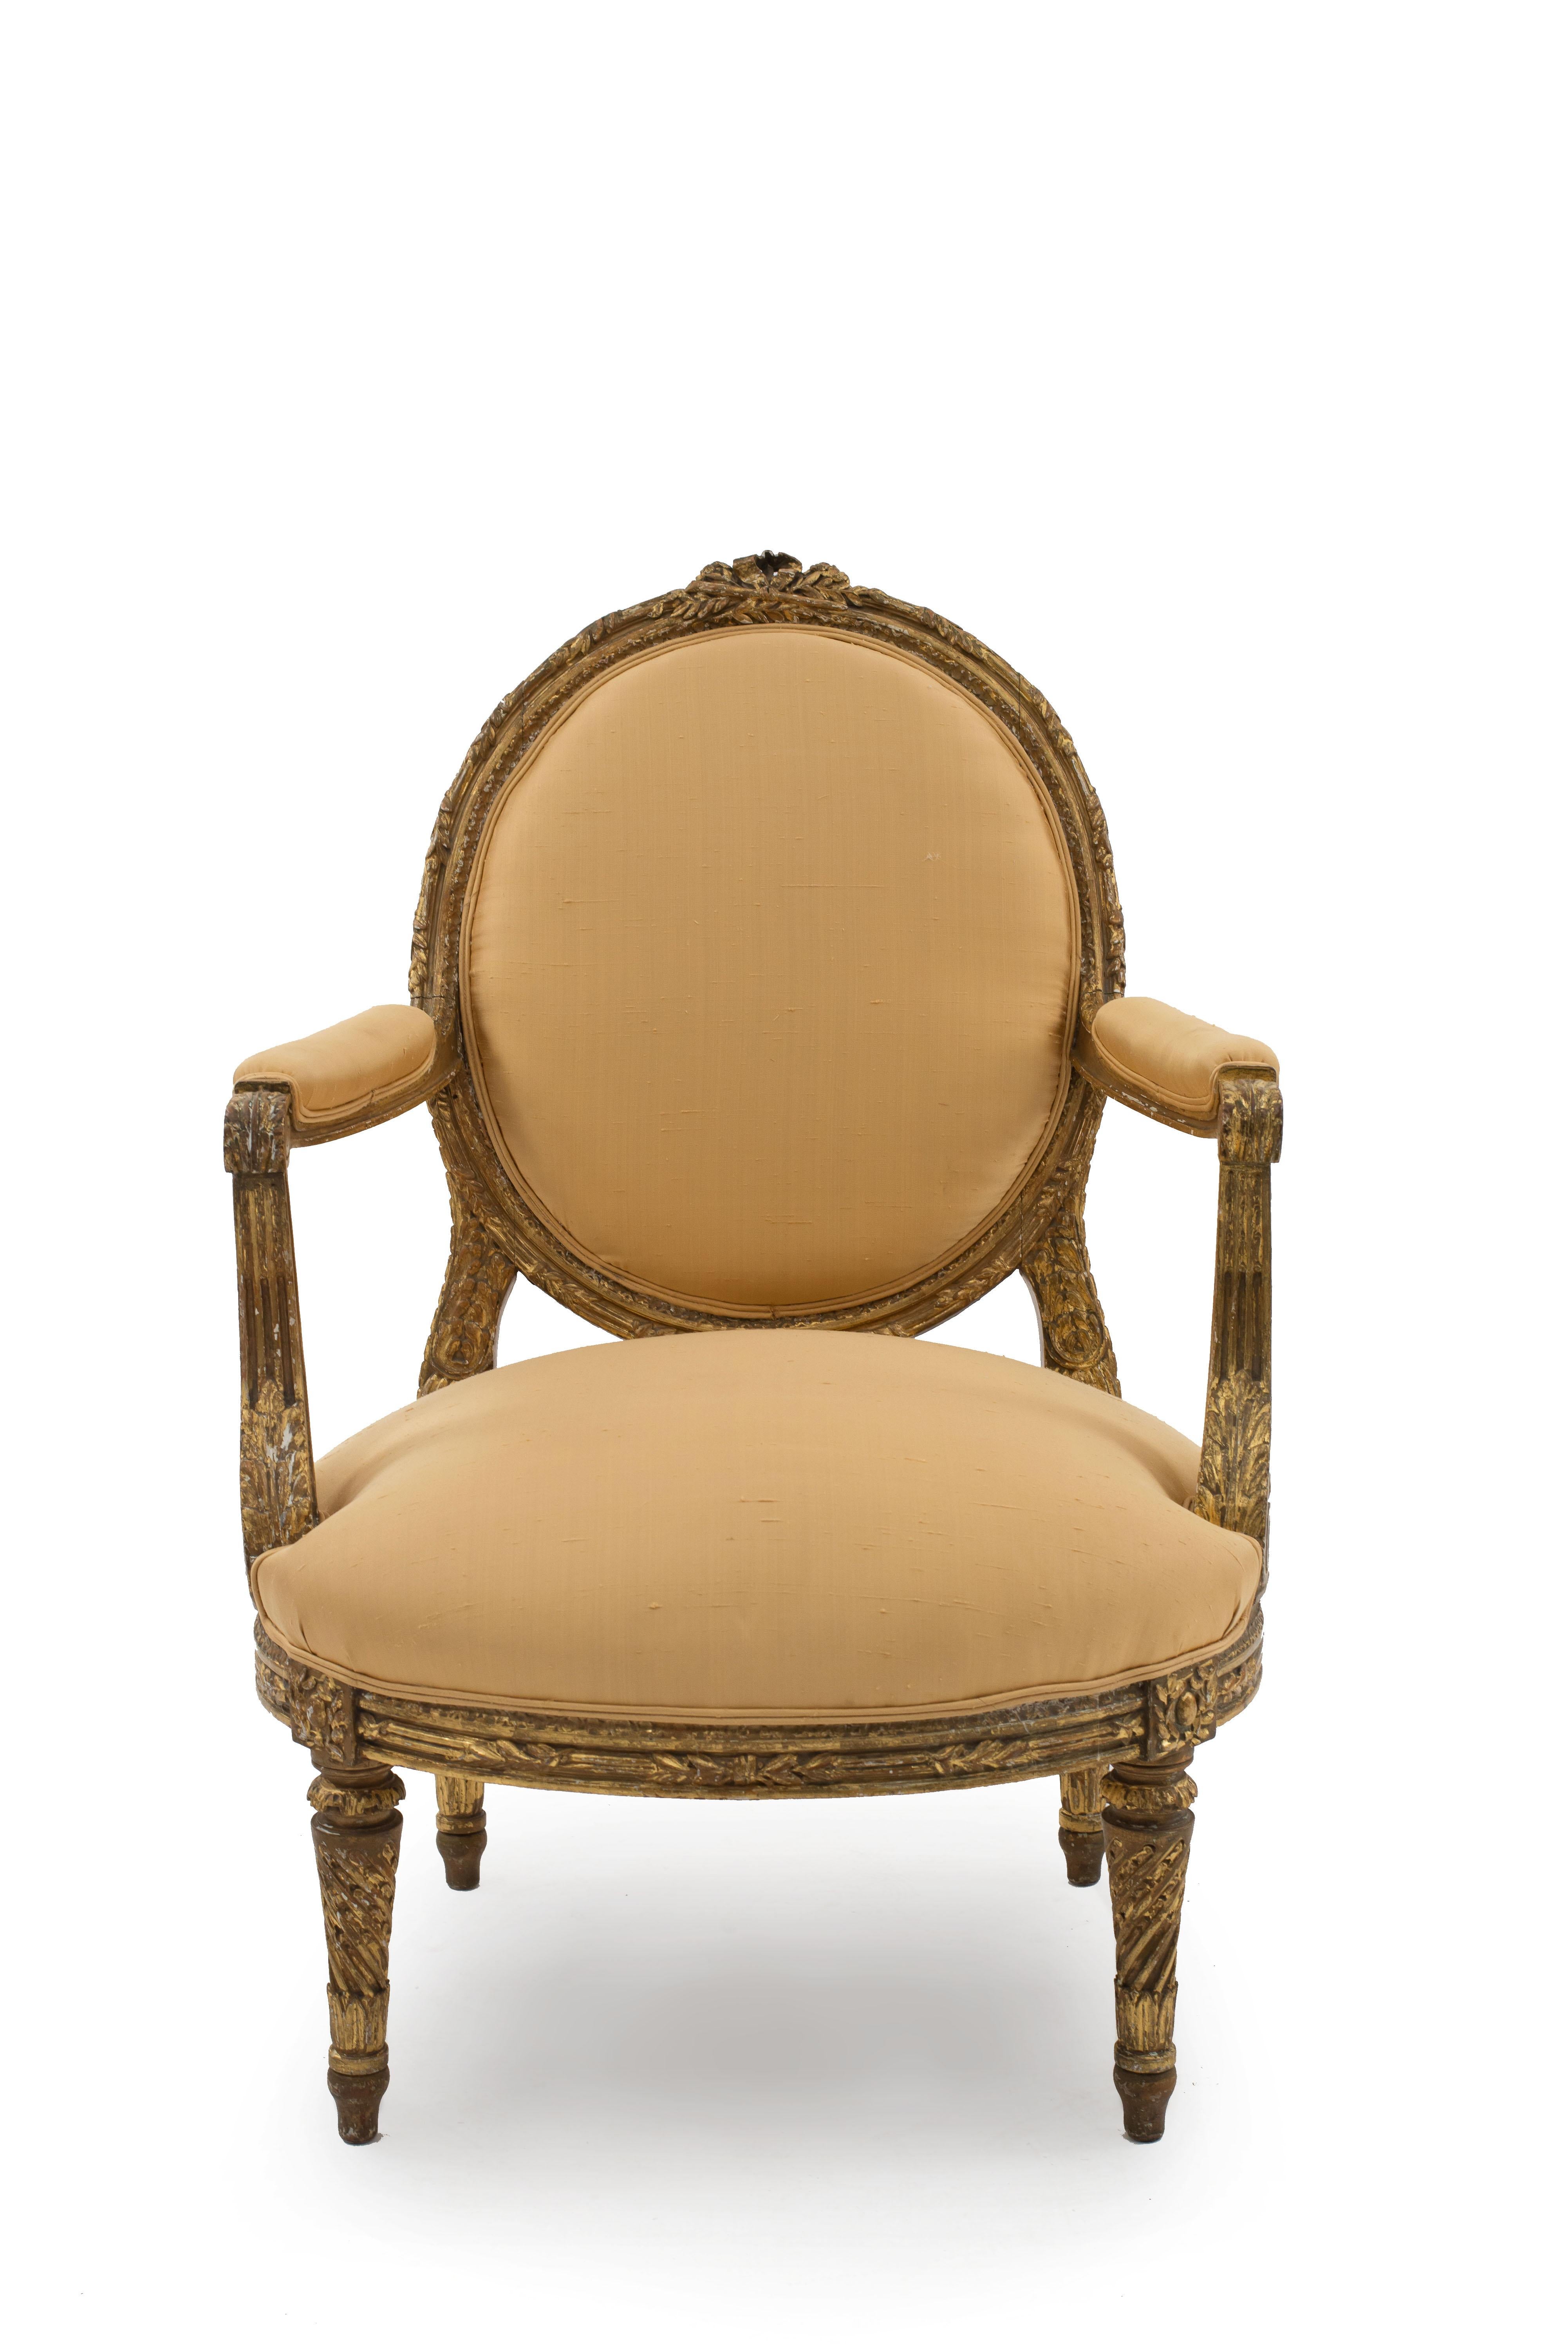 Pair of Louis XVI-style oval back armchairs with gold upholstery and carved giltwood frame and legs.